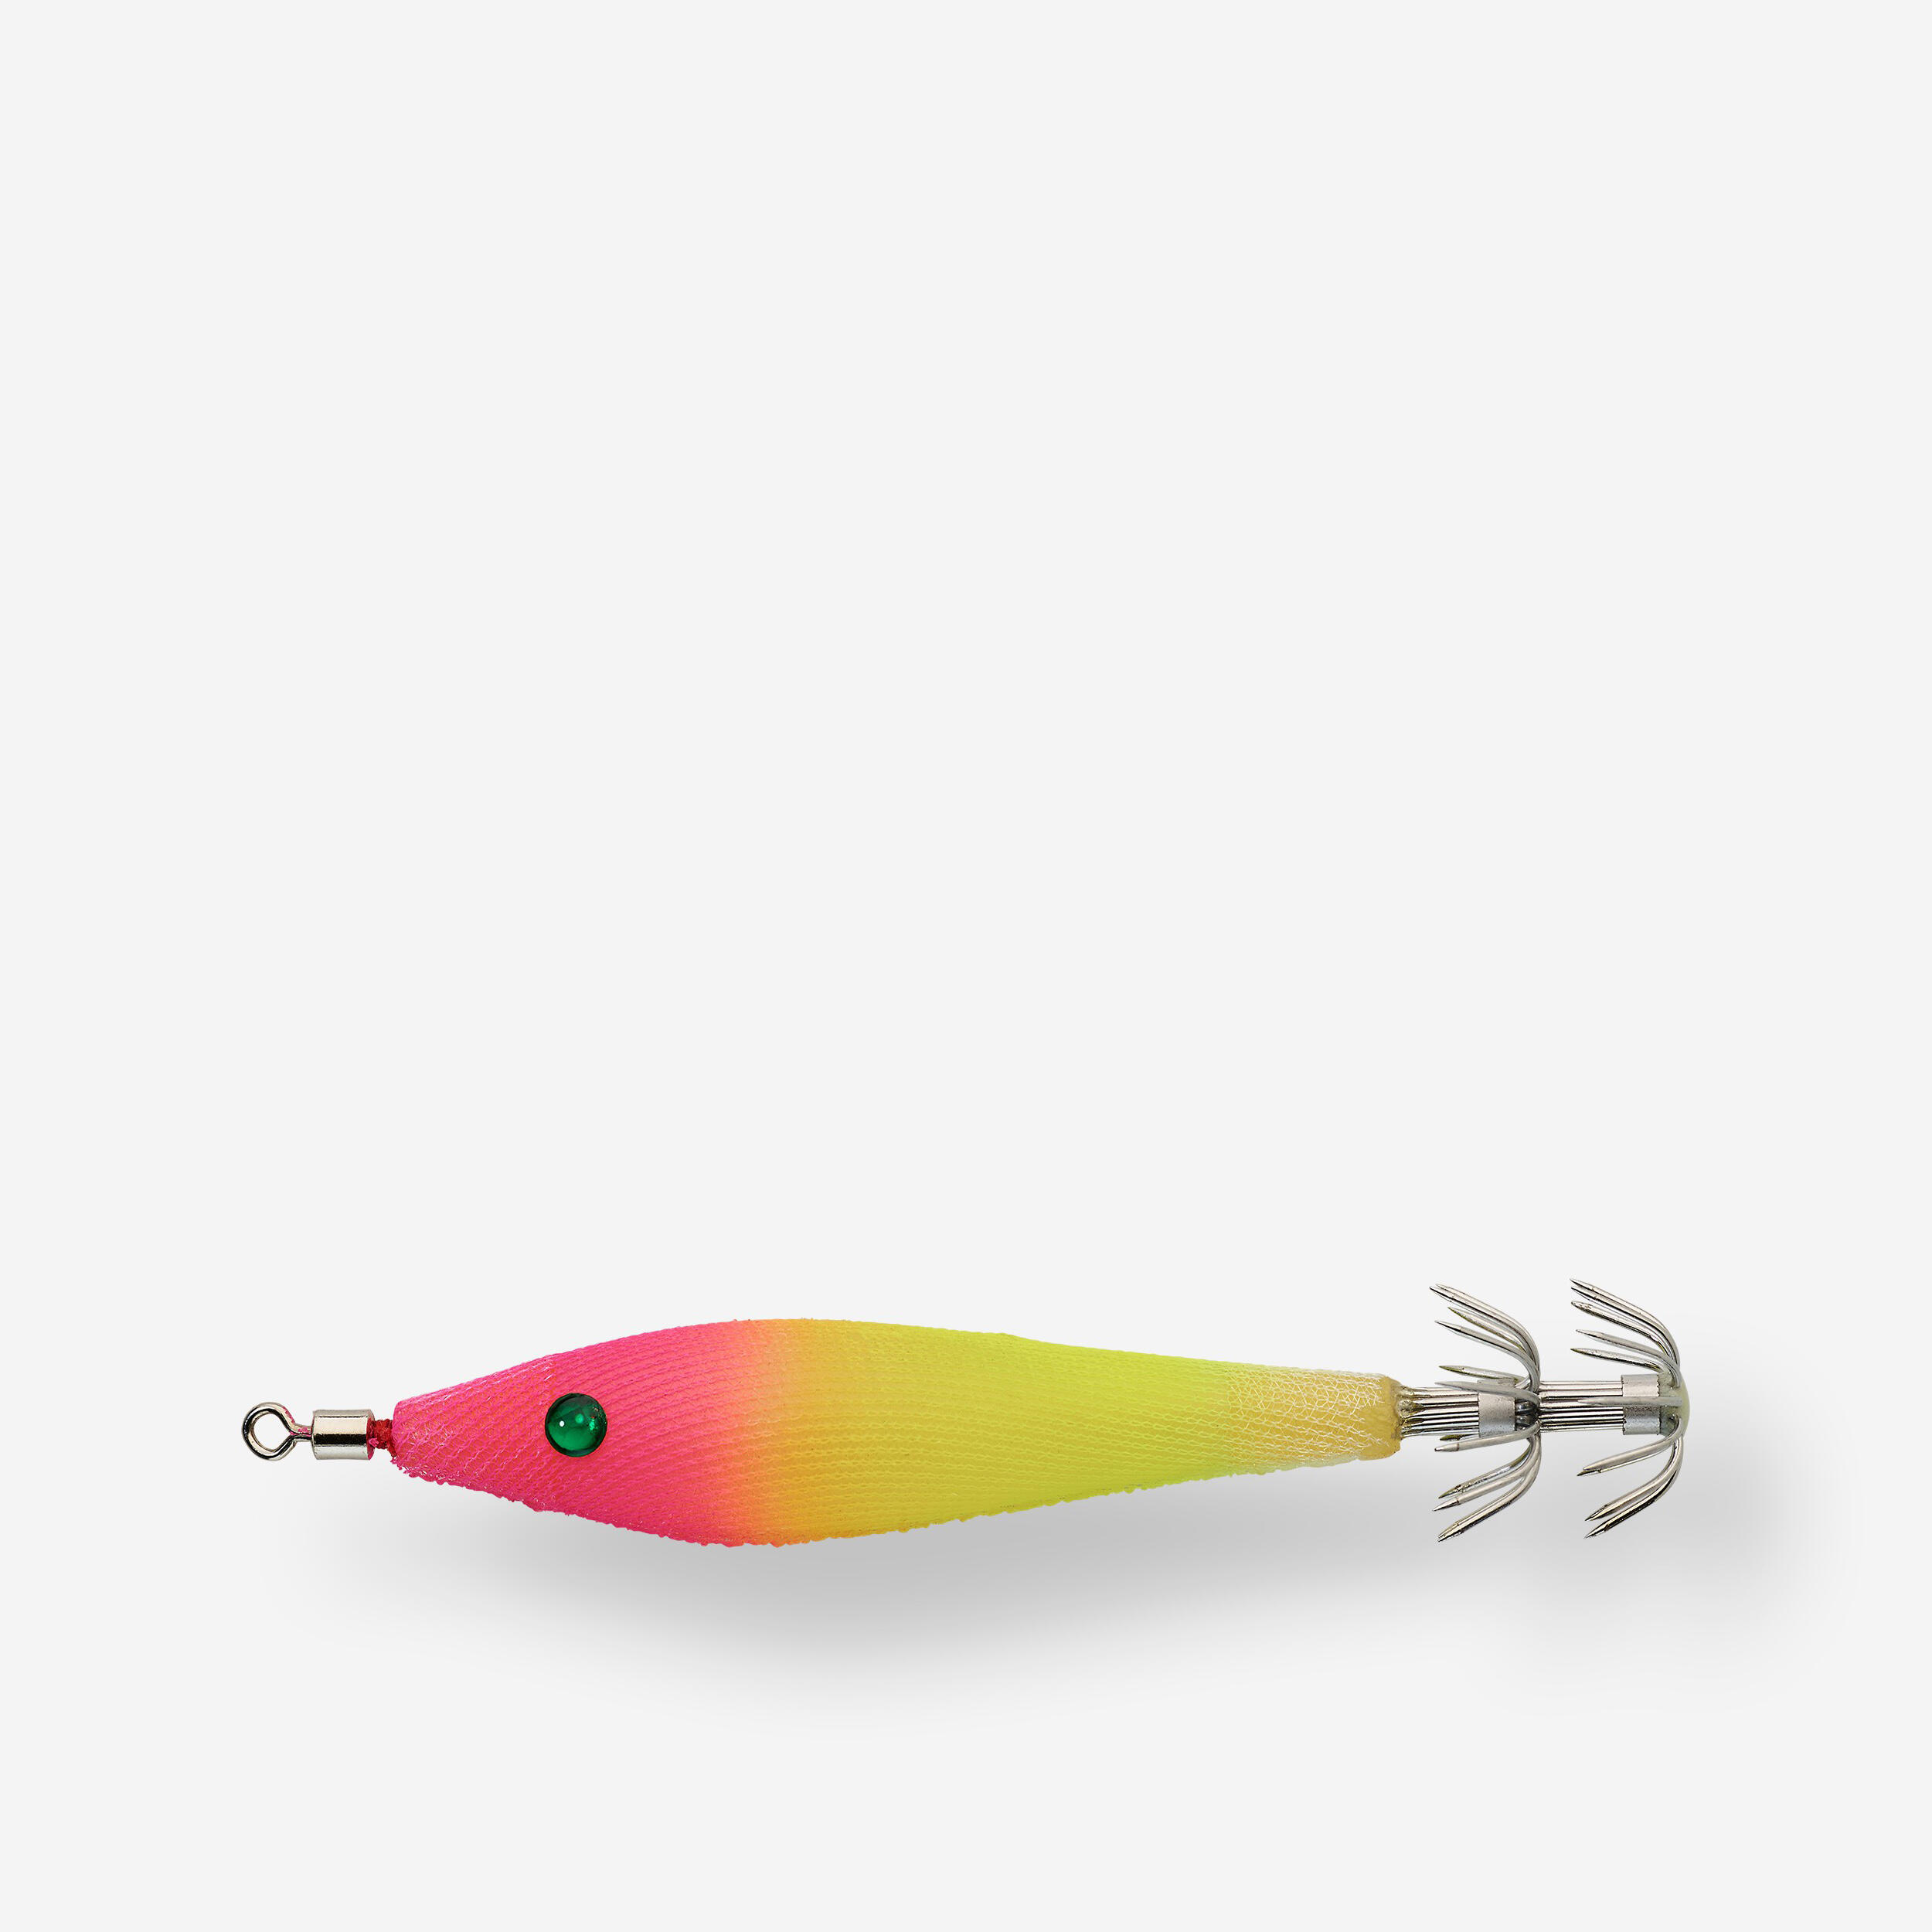 Oppai EBIKA SFT 2.0/60 Jig for Cuttlefish and Squid fishing - Neon Pink 1/5